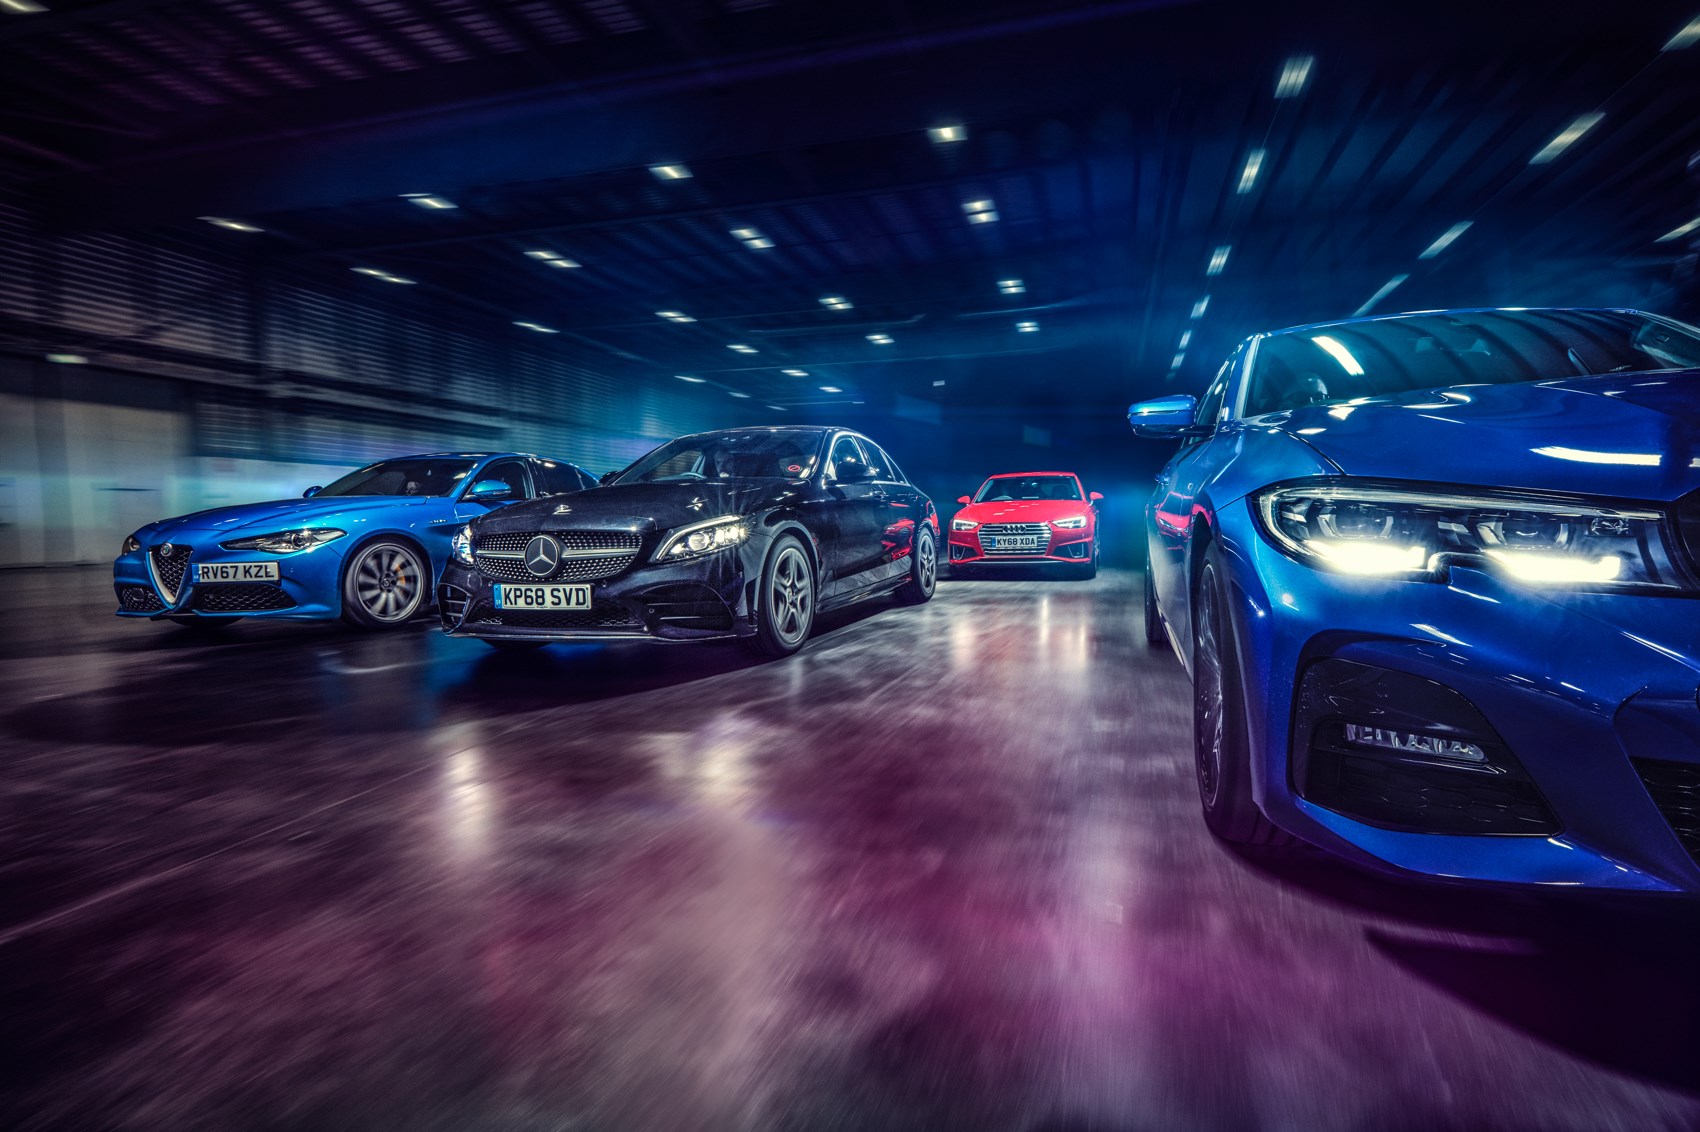 G20 BMW 3 Series officially revealed – up to 55 kg lighter with new  engines, suspension, technologies 